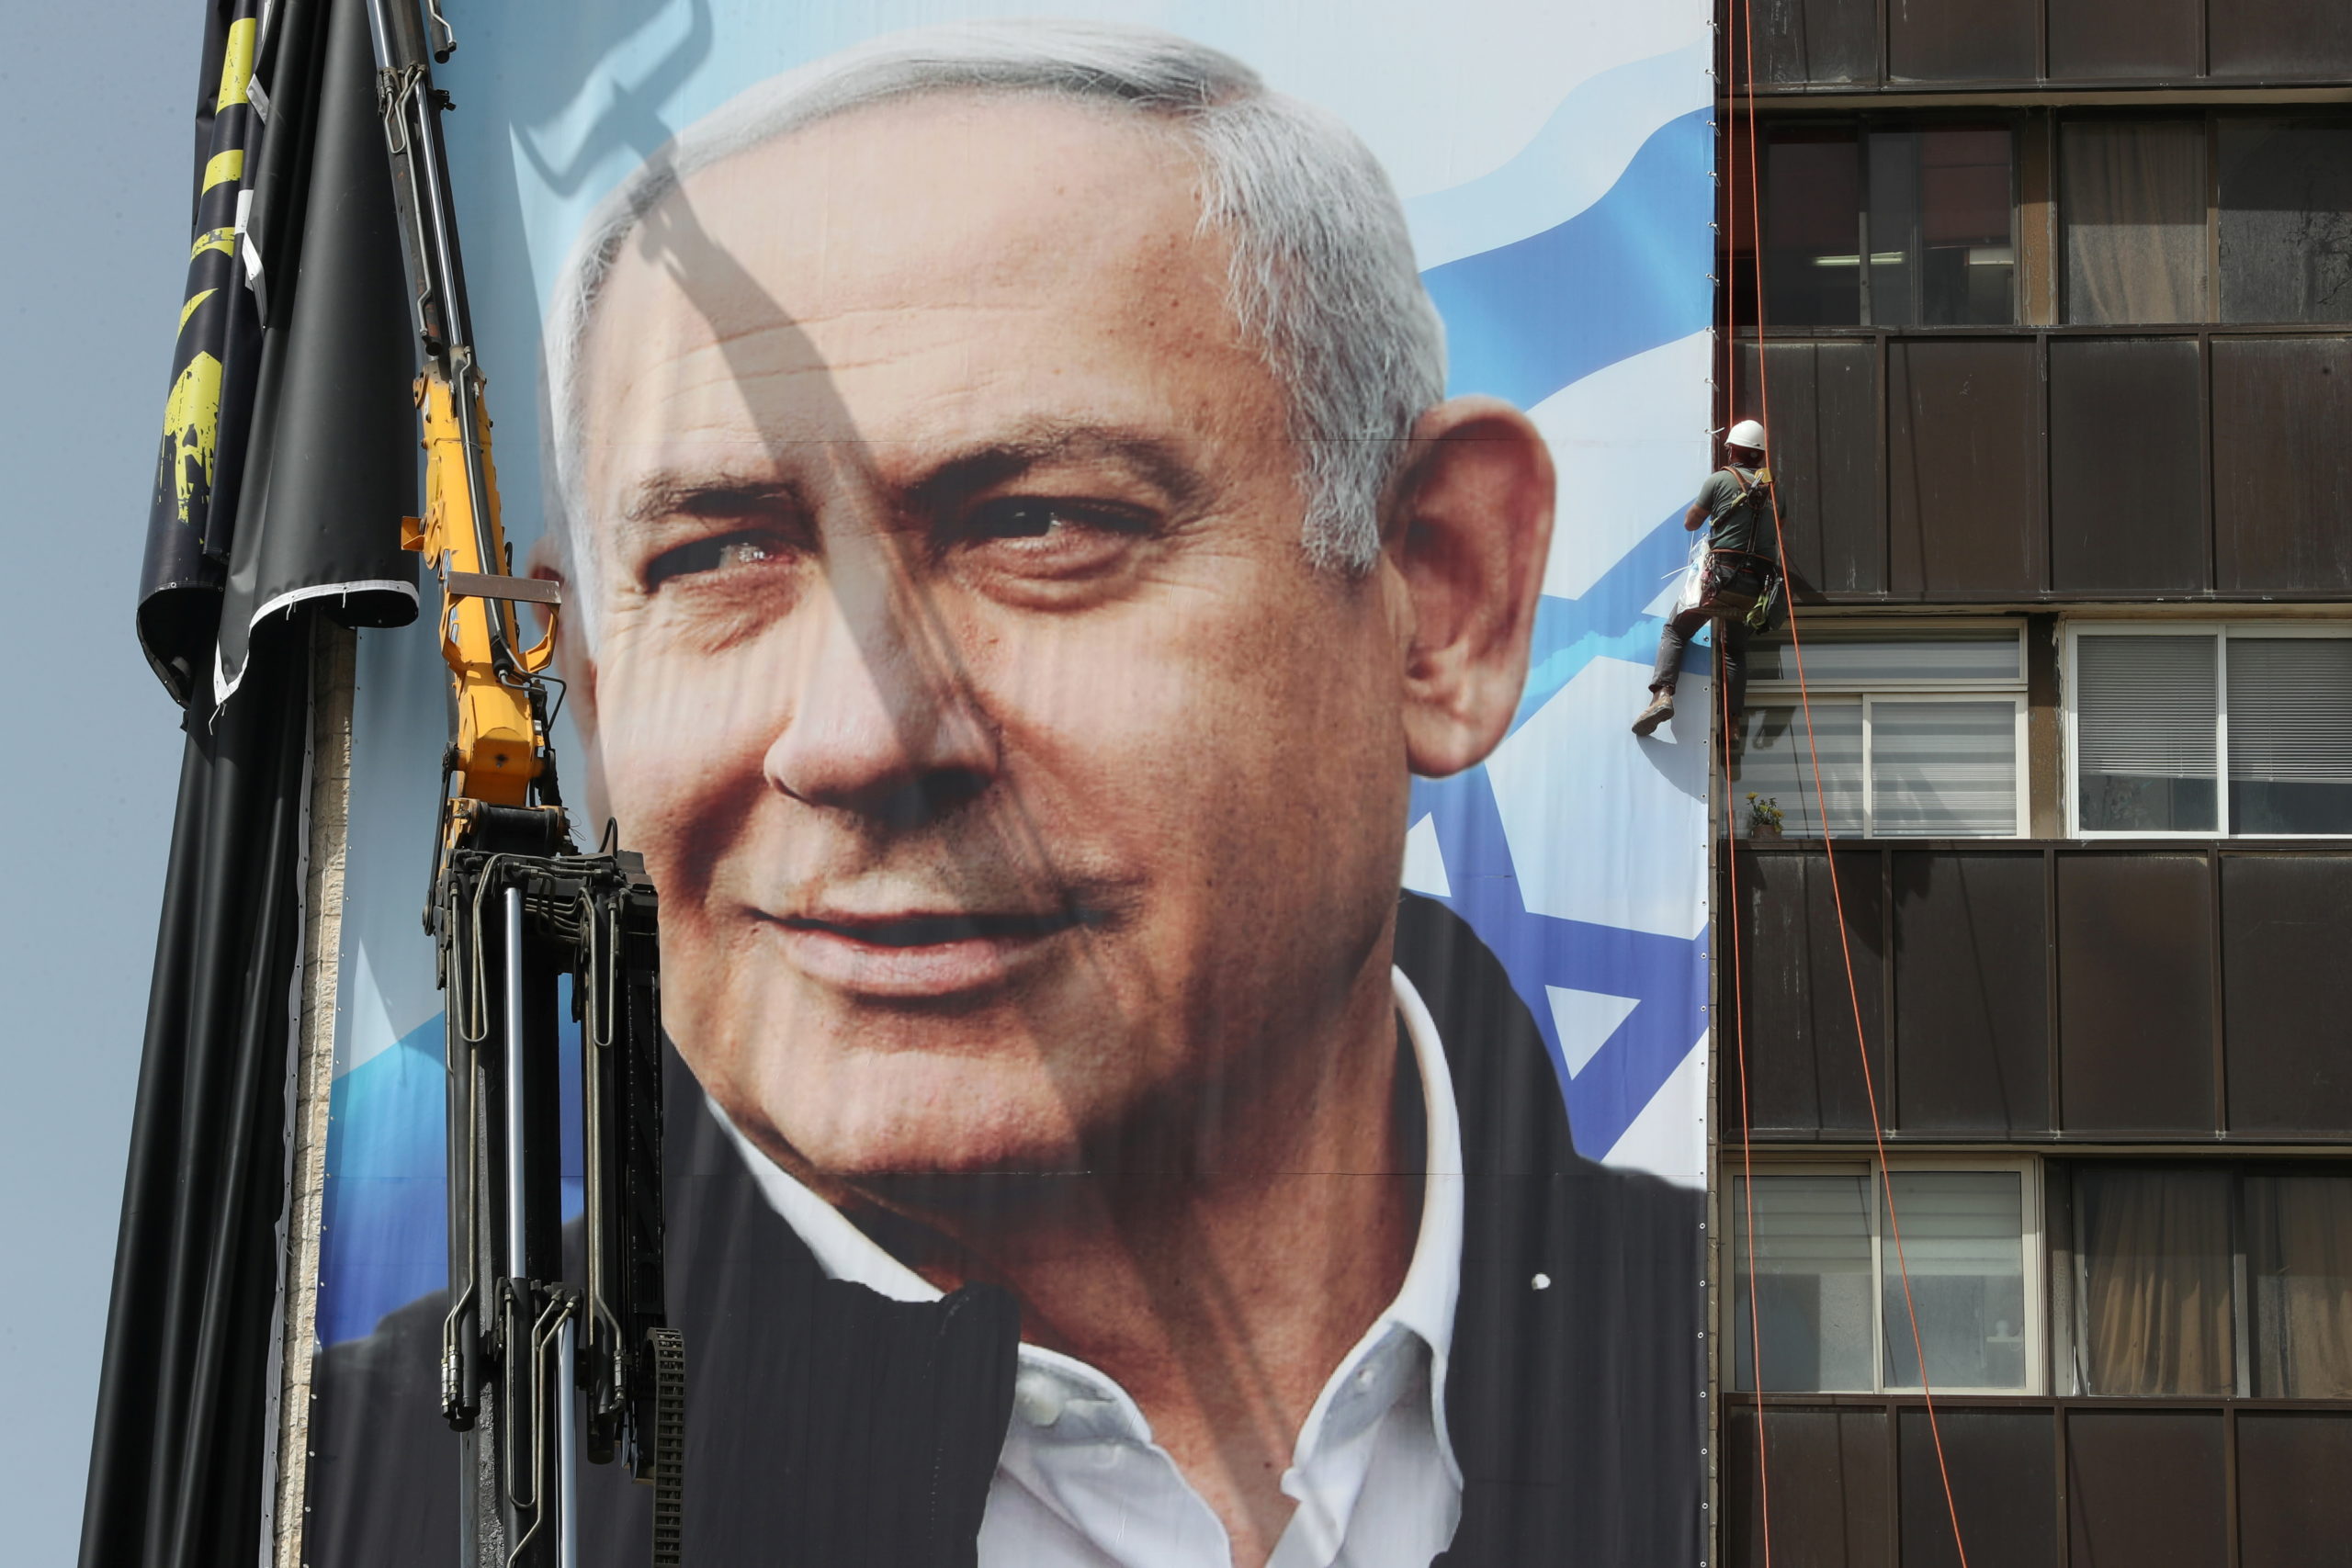 A labourer hangs a Likud party election campaign banner depicting party leader Israeli Prime Minister Benjamin Netanyahu, ahead of a March 23 ballot, in Jerusalem March 10, 2021. 